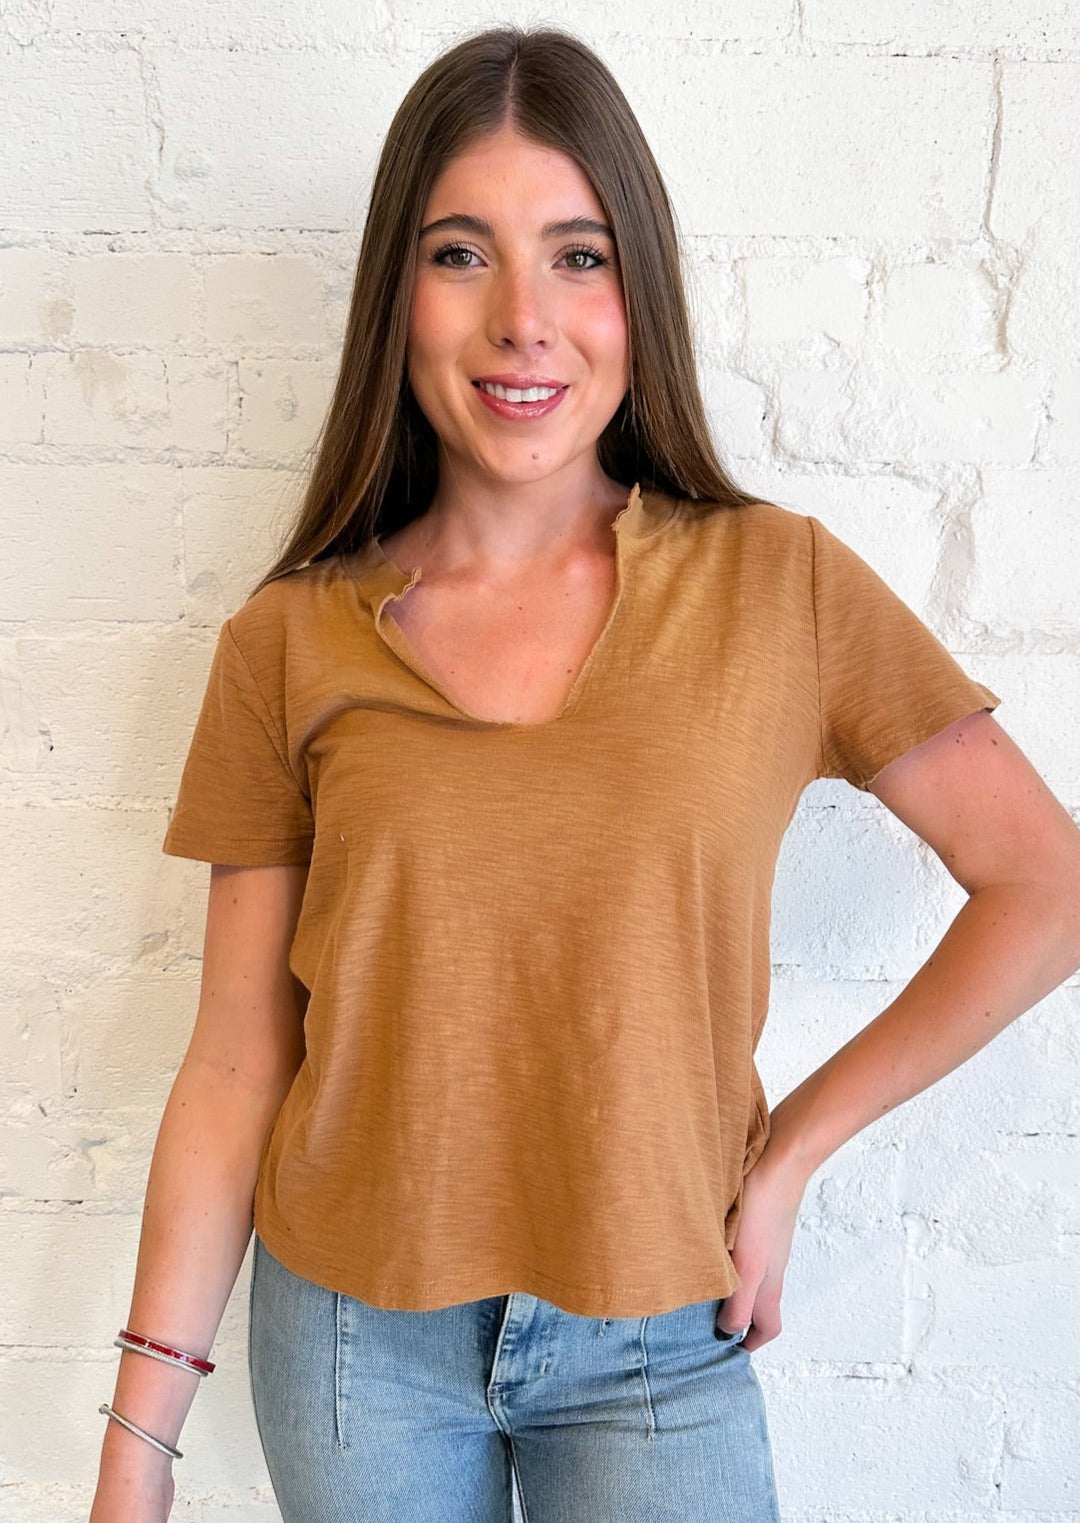 Plata Notched Tee, Tops, Adeline, Adeline, dallas boutique, dallas texas, texas boutique, women's boutique dallas, adeline boutique, dallas boutique, trendy boutique, affordable boutique